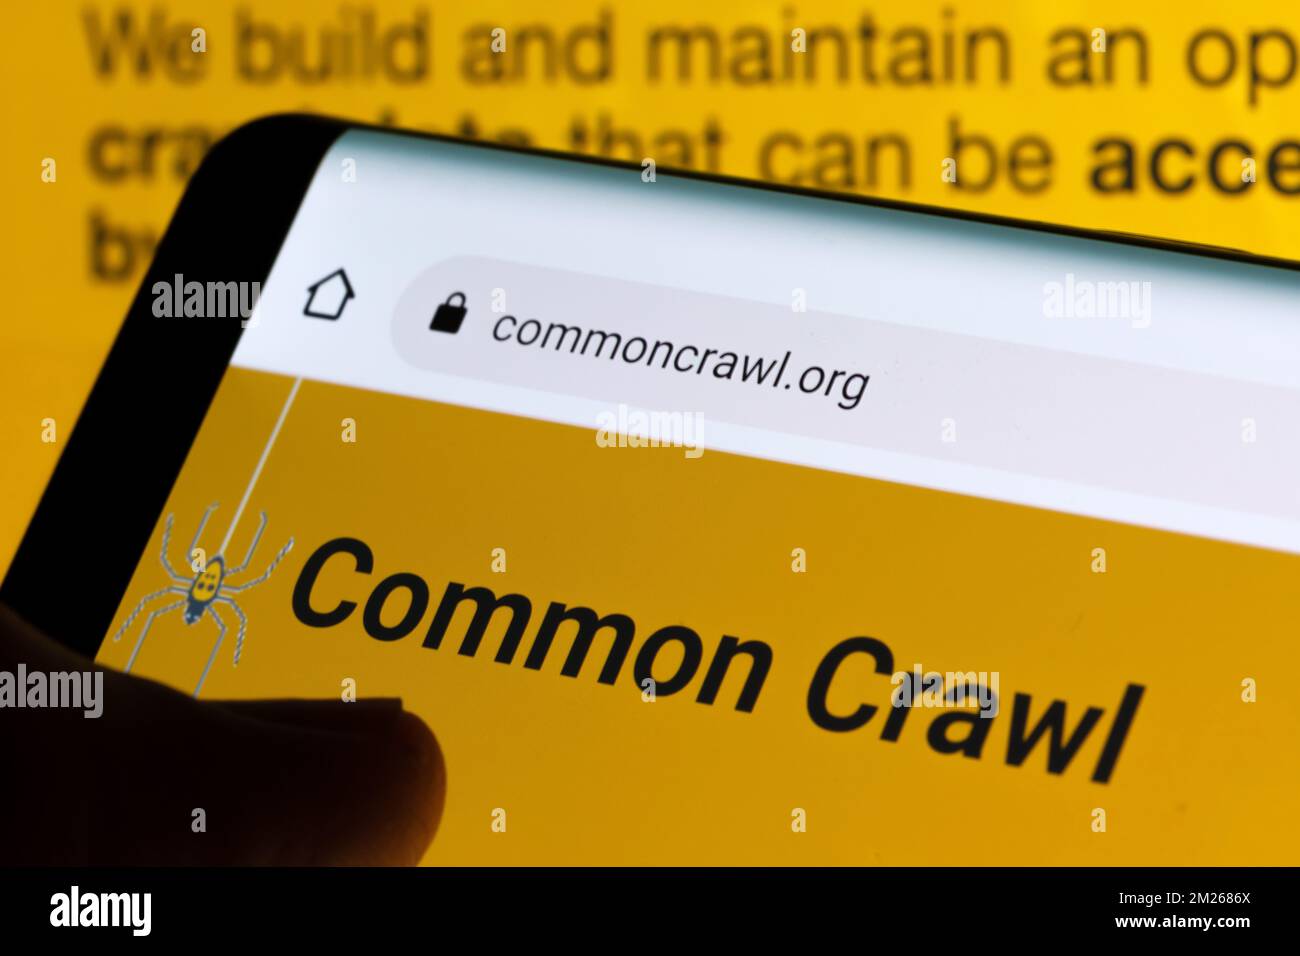 Common Crawl logo seen on the screen of smartphone and their  website on the background. Repository of web crawl data. Stafford, United Kingdom, Decem Stock Photo